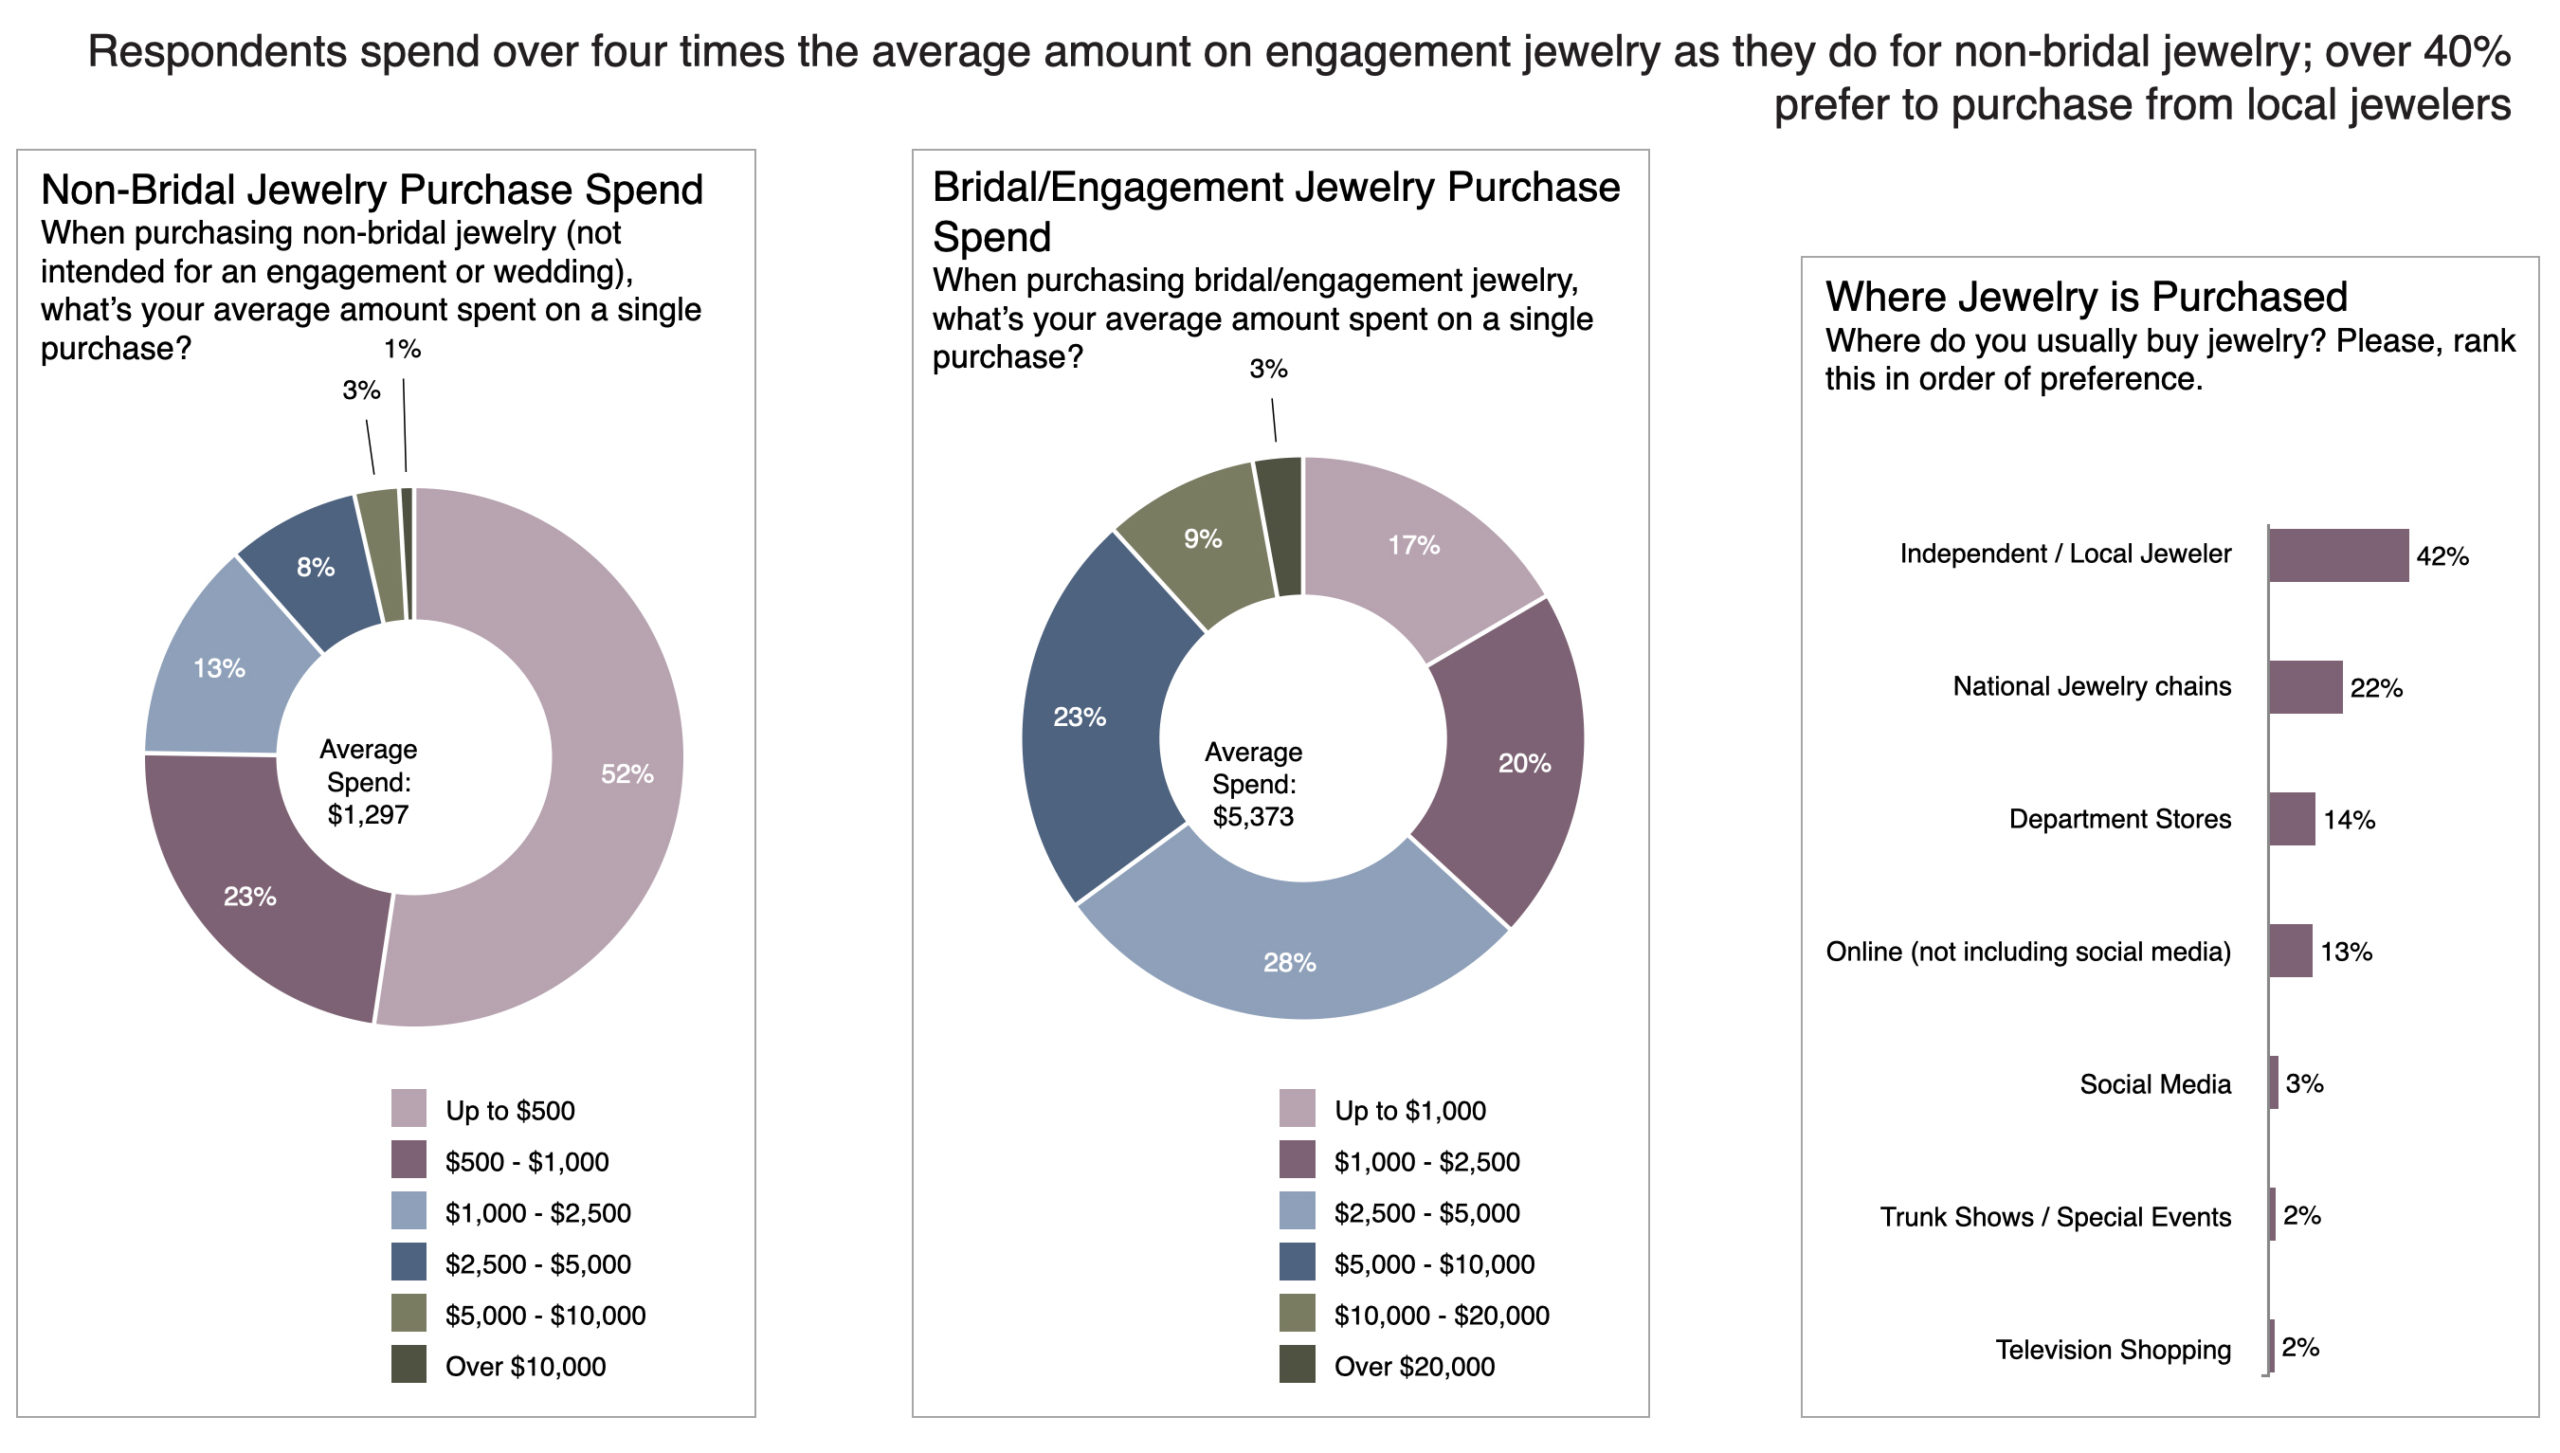 Consumer Research Study Sheds Light on What Makes a Jewelry Customer Buy